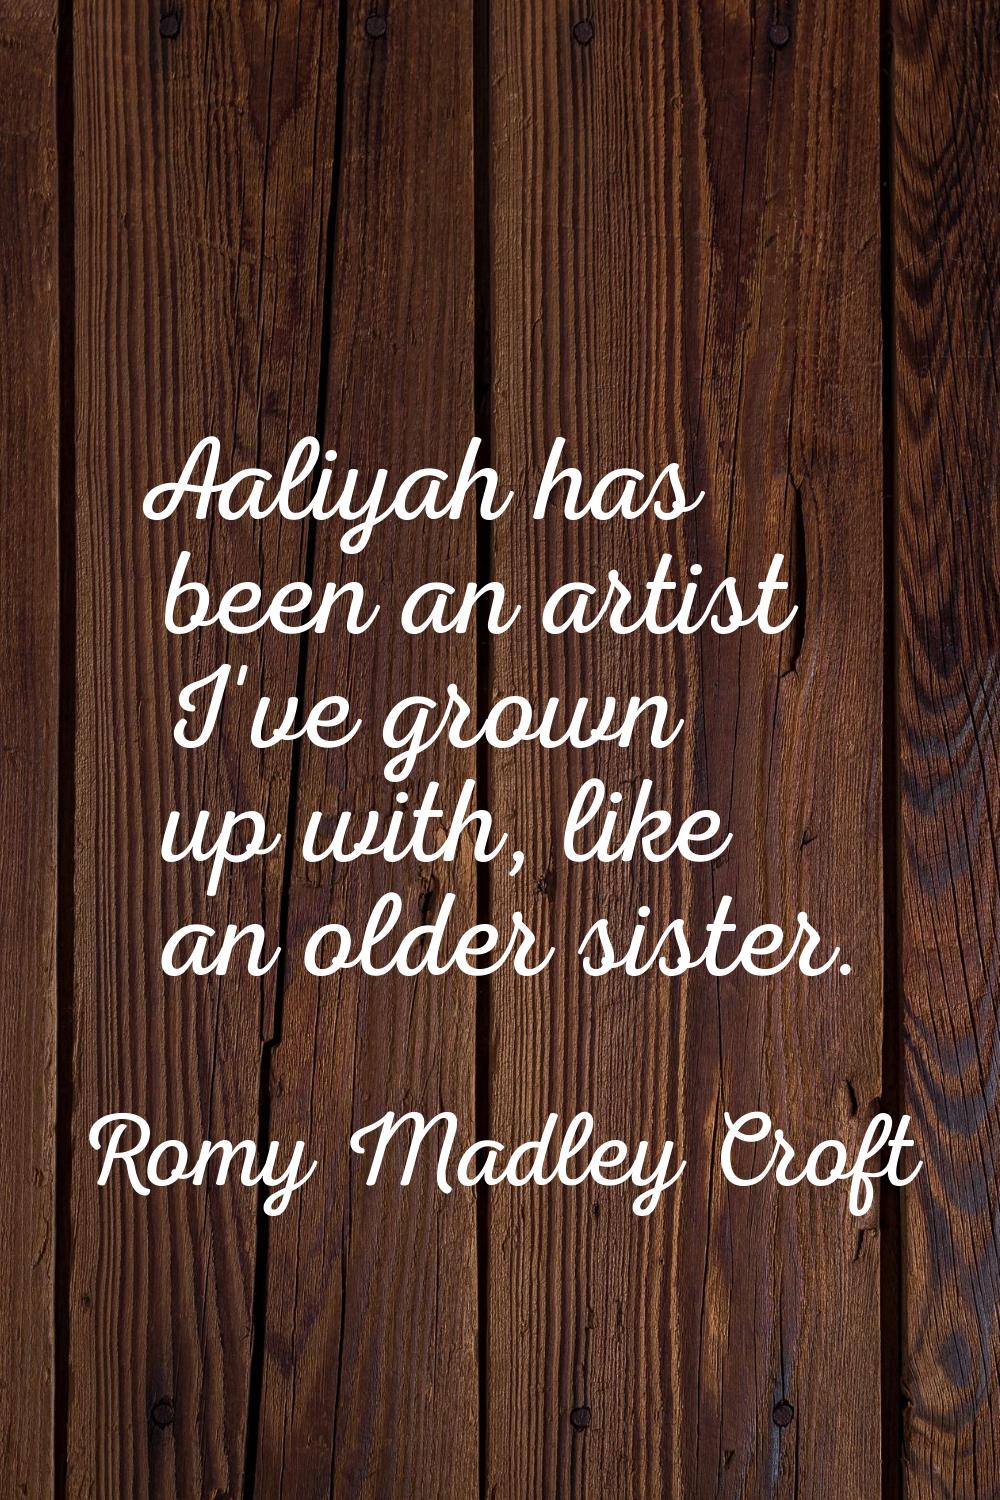 Aaliyah has been an artist I've grown up with, like an older sister.